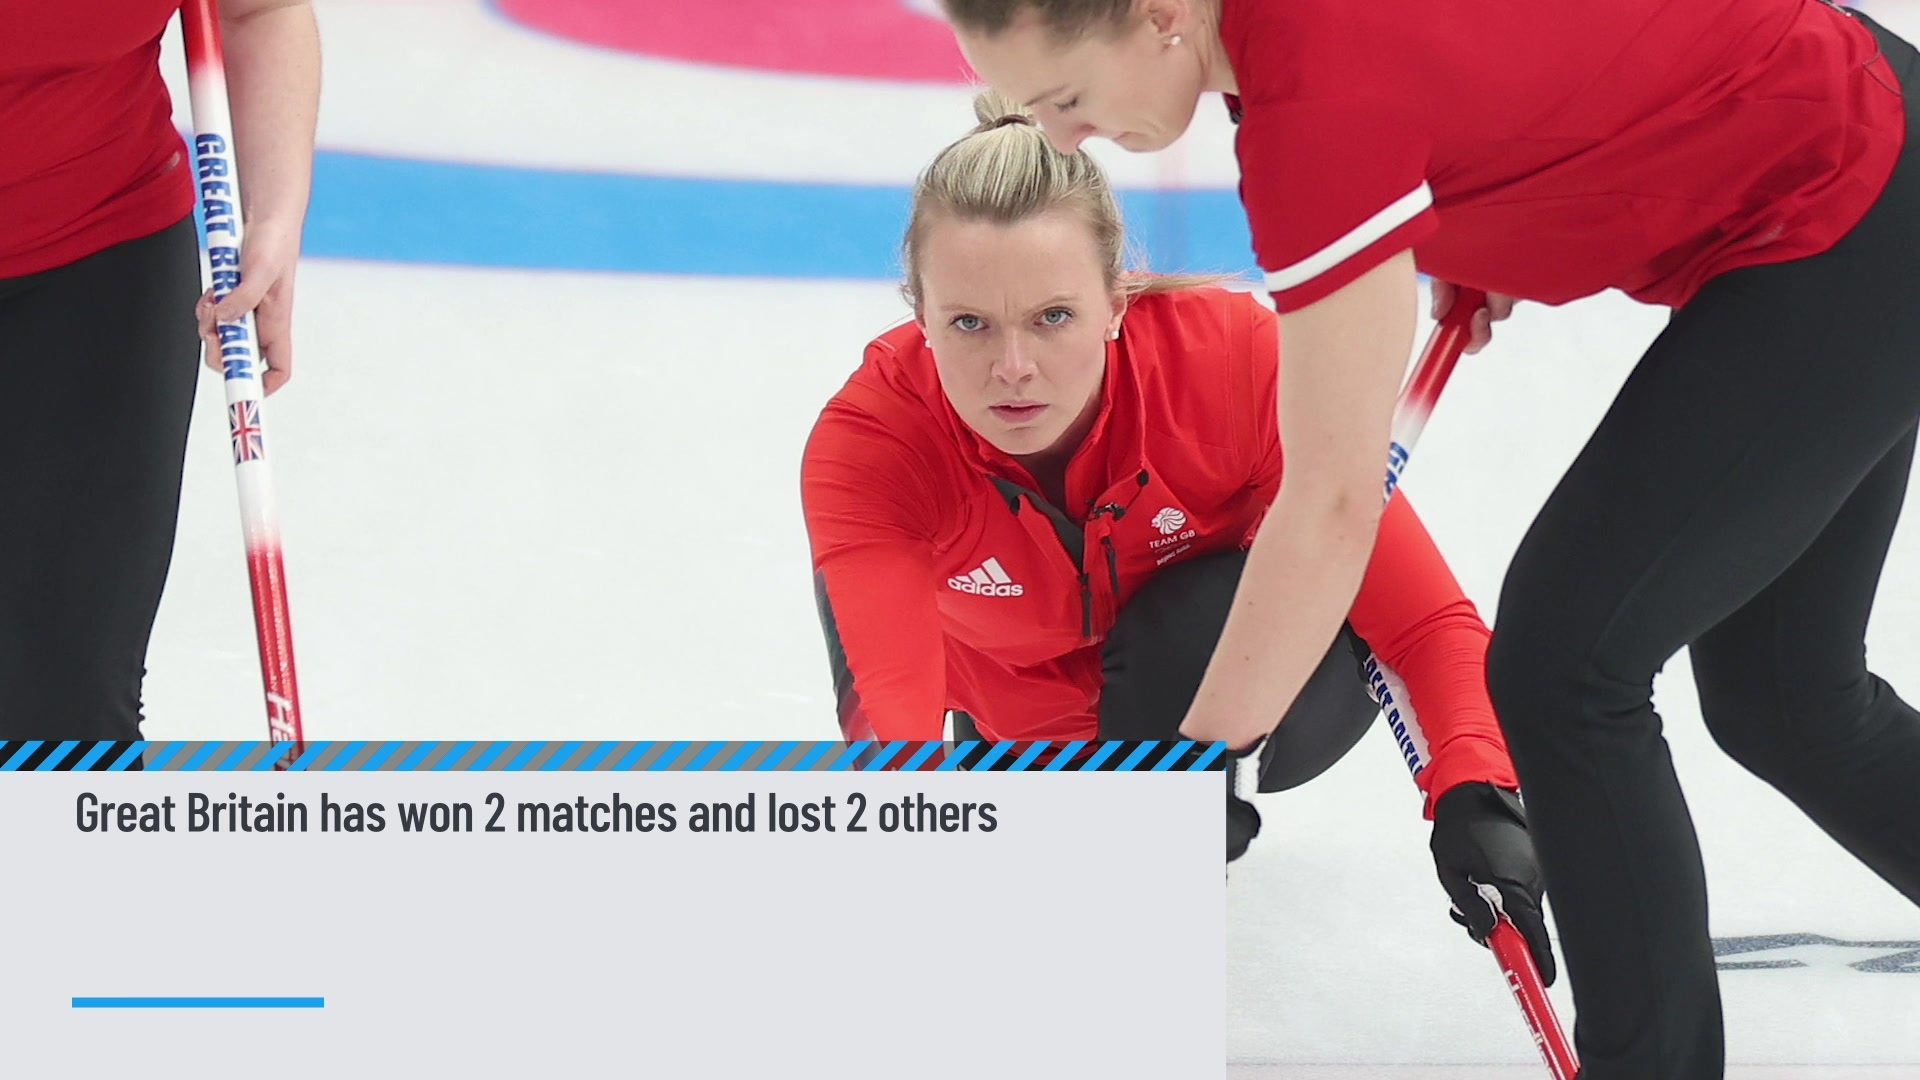 Great Britain Tops USA in Womens Curling Round Robin Match